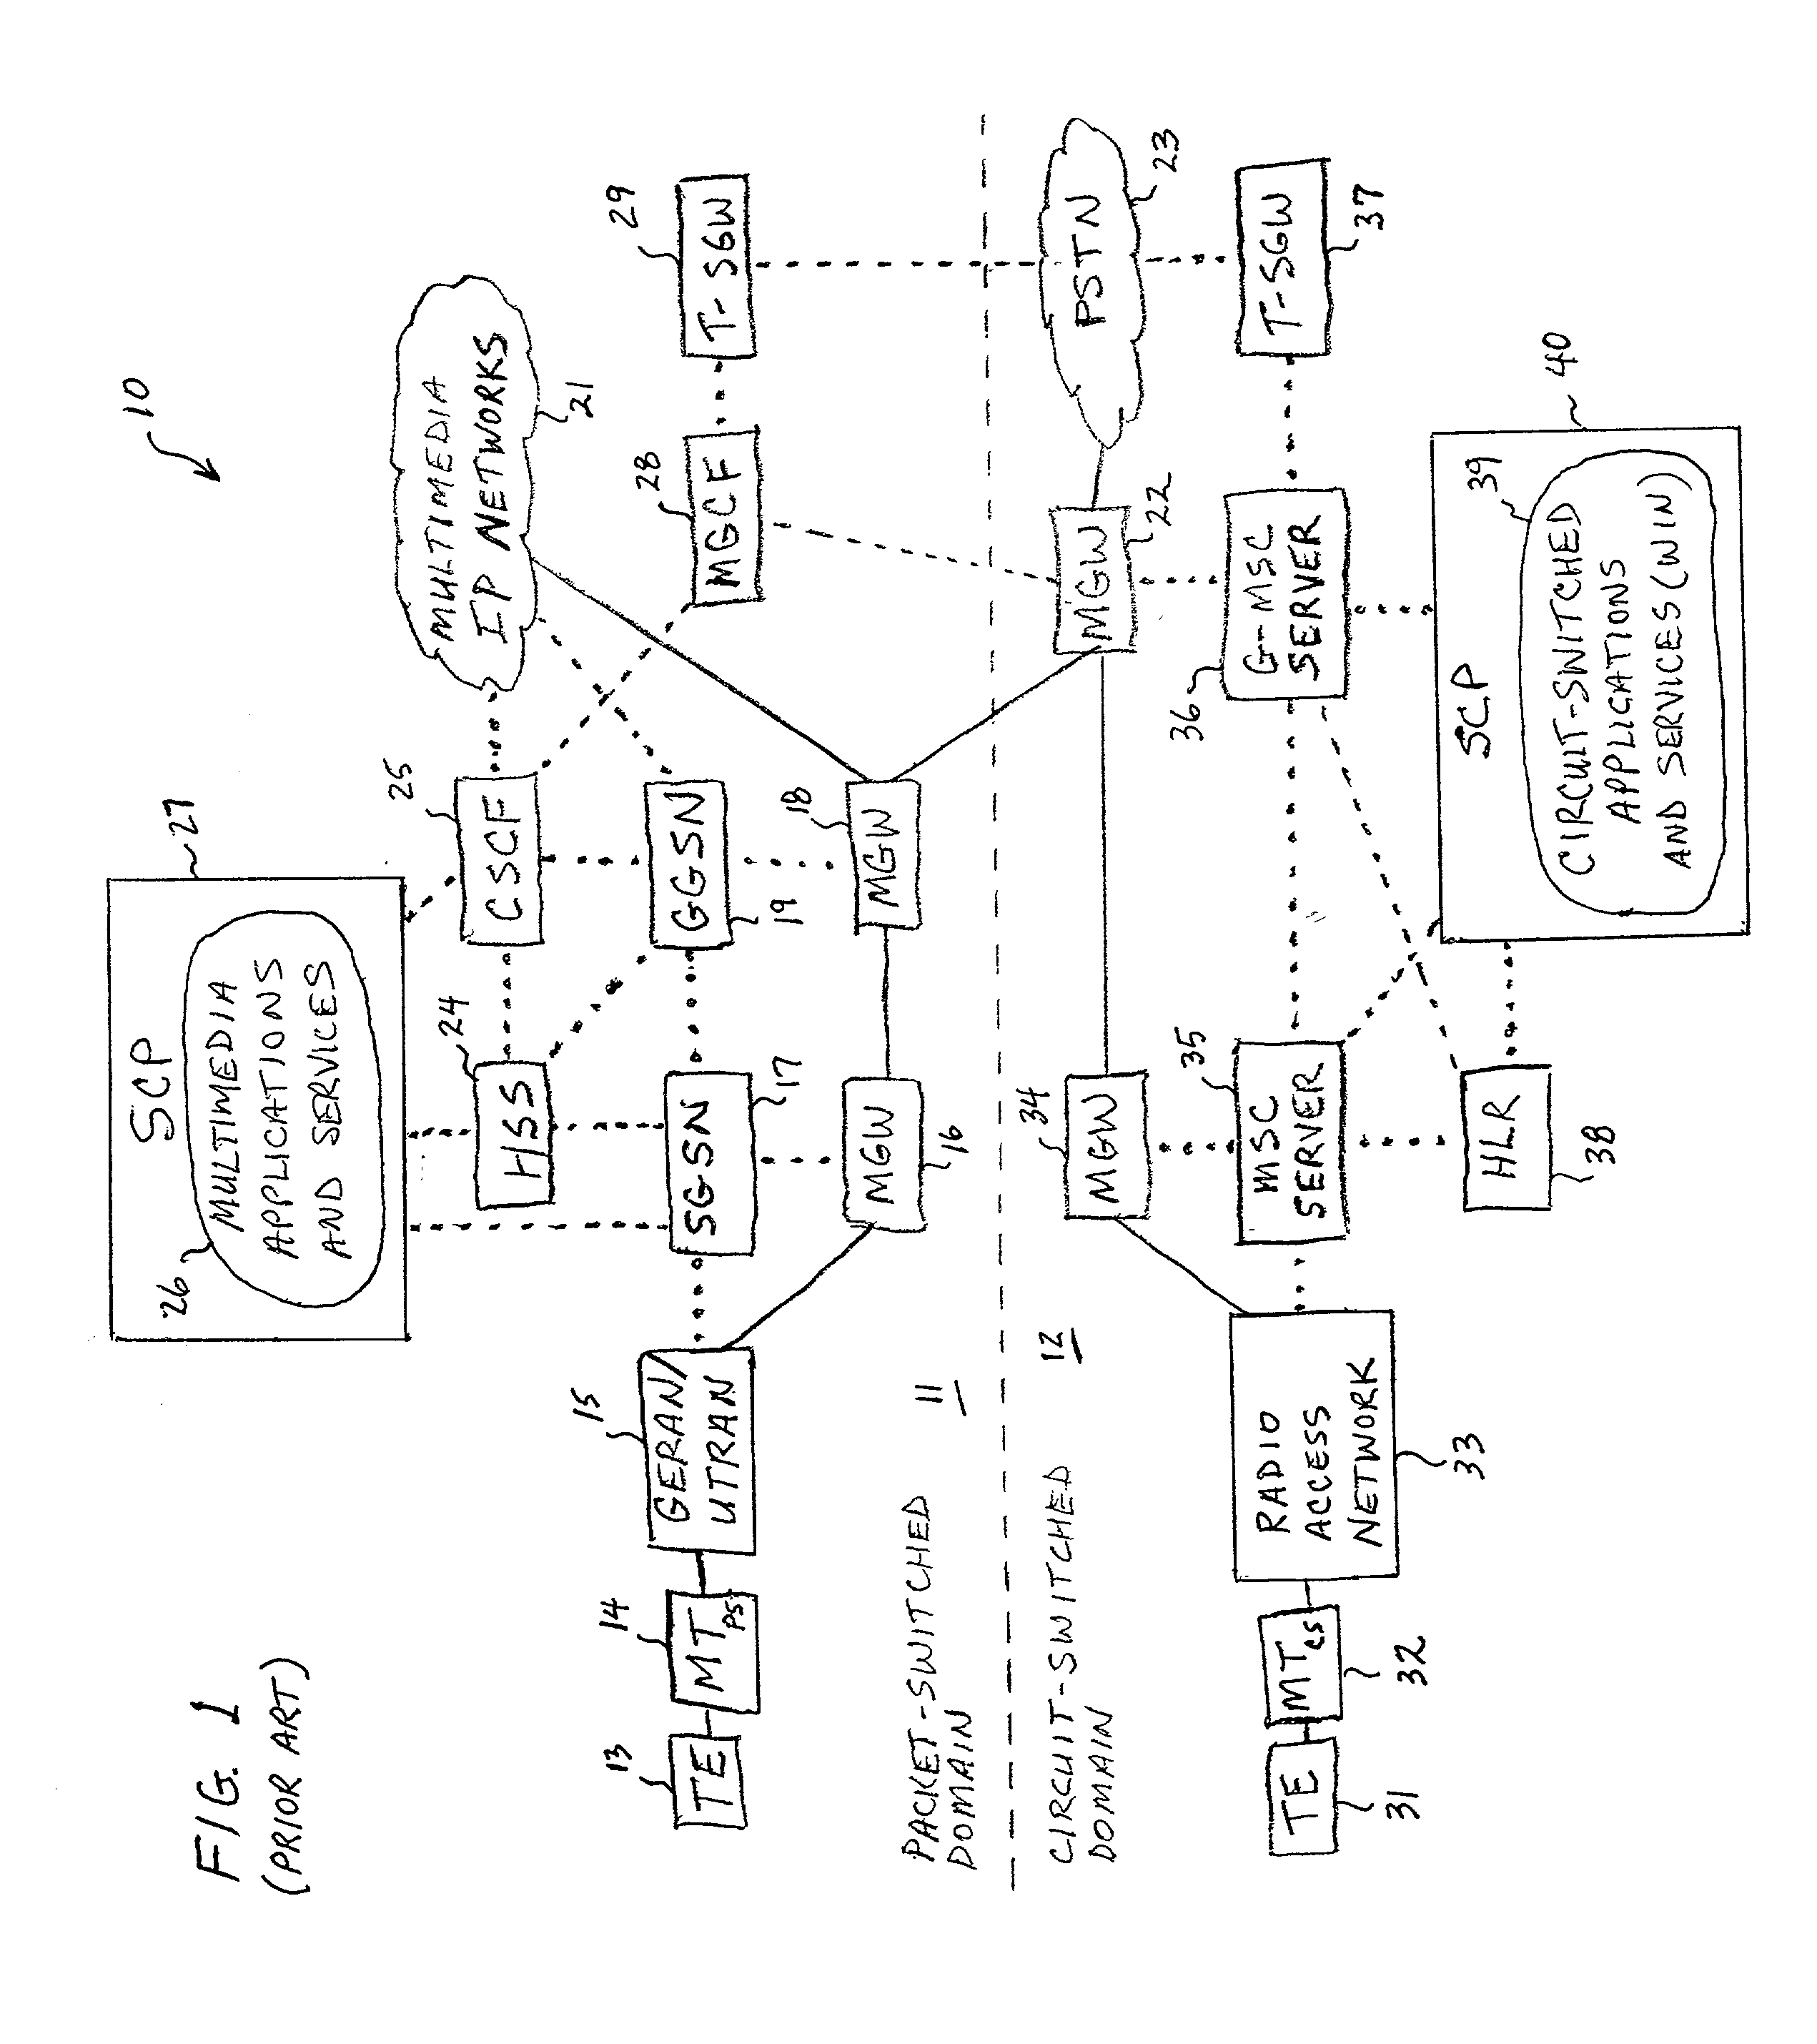 Hybrid media gateway control function providing circuit-switched access to a packet-switched radio telecommunications network